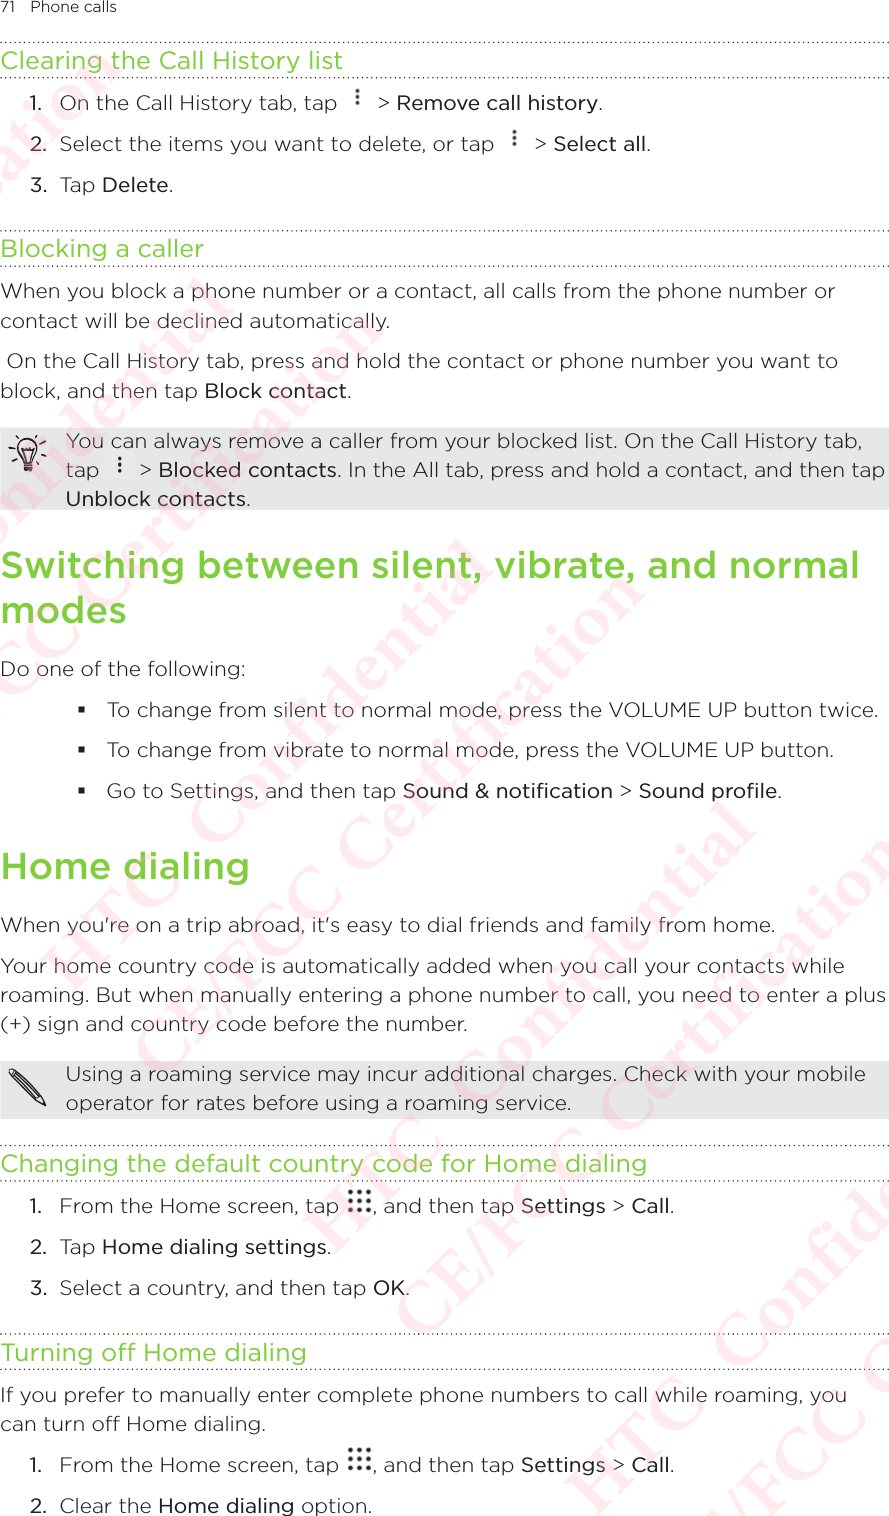 71 Phone callsClearing the Call History list1.  On the Call History tab, tap   &gt; Remove call history. 2.  Select the items you want to delete, or tap   &gt; Select all. 3.  Tap Delete. Blocking a callerWhen you block a phone number or a contact, all calls from the phone number or contact will be declined automatically.  On the Call History tab, press and hold the contact or phone number you want to block, and then tap Block contact. You can always remove a caller from your blocked list. On the Call History tab, tap You can always remove a caller from your blocked list. On the Call History tab,  &gt; Blocked contacts. In the All tab, press and hold a contact, and then tap Unblock contacts. Switching between silent, vibrate, and normal modesDo one of the following:  To change from silent to normal mode, press the VOLUME UP button twice.  To change from vibrate to normal mode, press the VOLUME UP button.  Go to Settings, and then tap Sound &amp; notification &gt; Sound profile. Home dialingWhen you&apos;re on a trip abroad, it&apos;s easy to dial friends and family from home. Your home country code is automatically added when you call your contacts while roaming. But when manually entering a phone number to call, you need to enter a plus (+) sign and country code before the number. Using a roaming service may incur additional charges. Check with your mobile operator for rates before using a roaming service. Changing the default country code for Home dialing1.  From the Home screen, tap  , and then tap Settings &gt; Call. 2.  Tap Home dialing settings. 3.  Select a country, and then tap OK. Turning off Home dialingIf you prefer to manually enter complete phone numbers to call while roaming, you can turn off Home dialing. 1.  From the Home screen, tap  , and then tap Settings &gt; Call. 2.  Clear the Home dialing option. HTC  Confidential CE/FCC Certification  HTC  Confidential CE/FCC Certification  HTC  Confidential CE/FCC Certification  HTC  Confidential CE/FCC Certification  HTC  Confidential CE/FCC Certification 